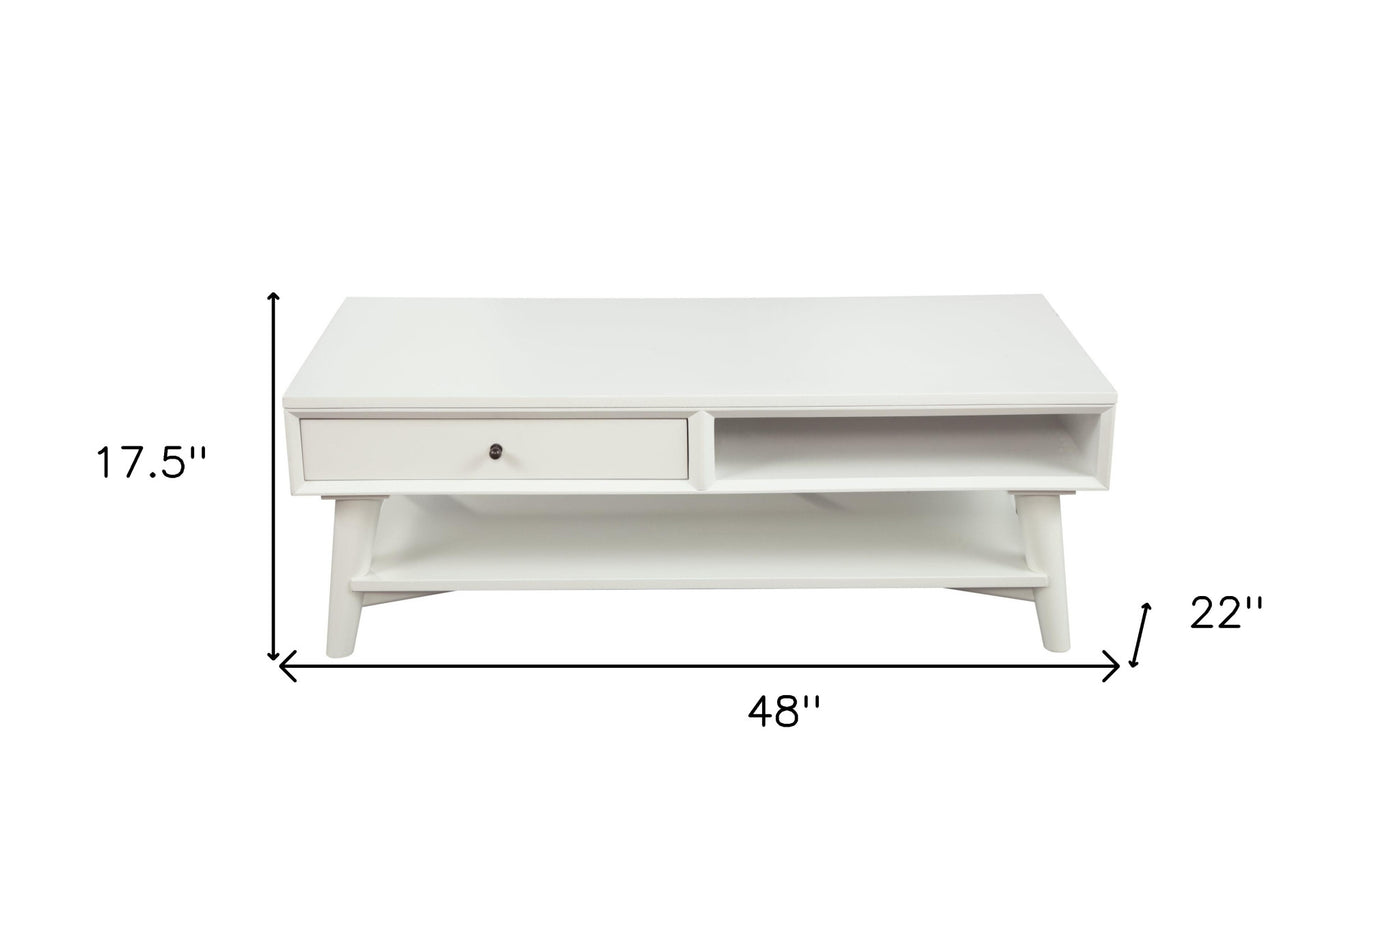 48" White Rectangular Coffee Table With Drawer